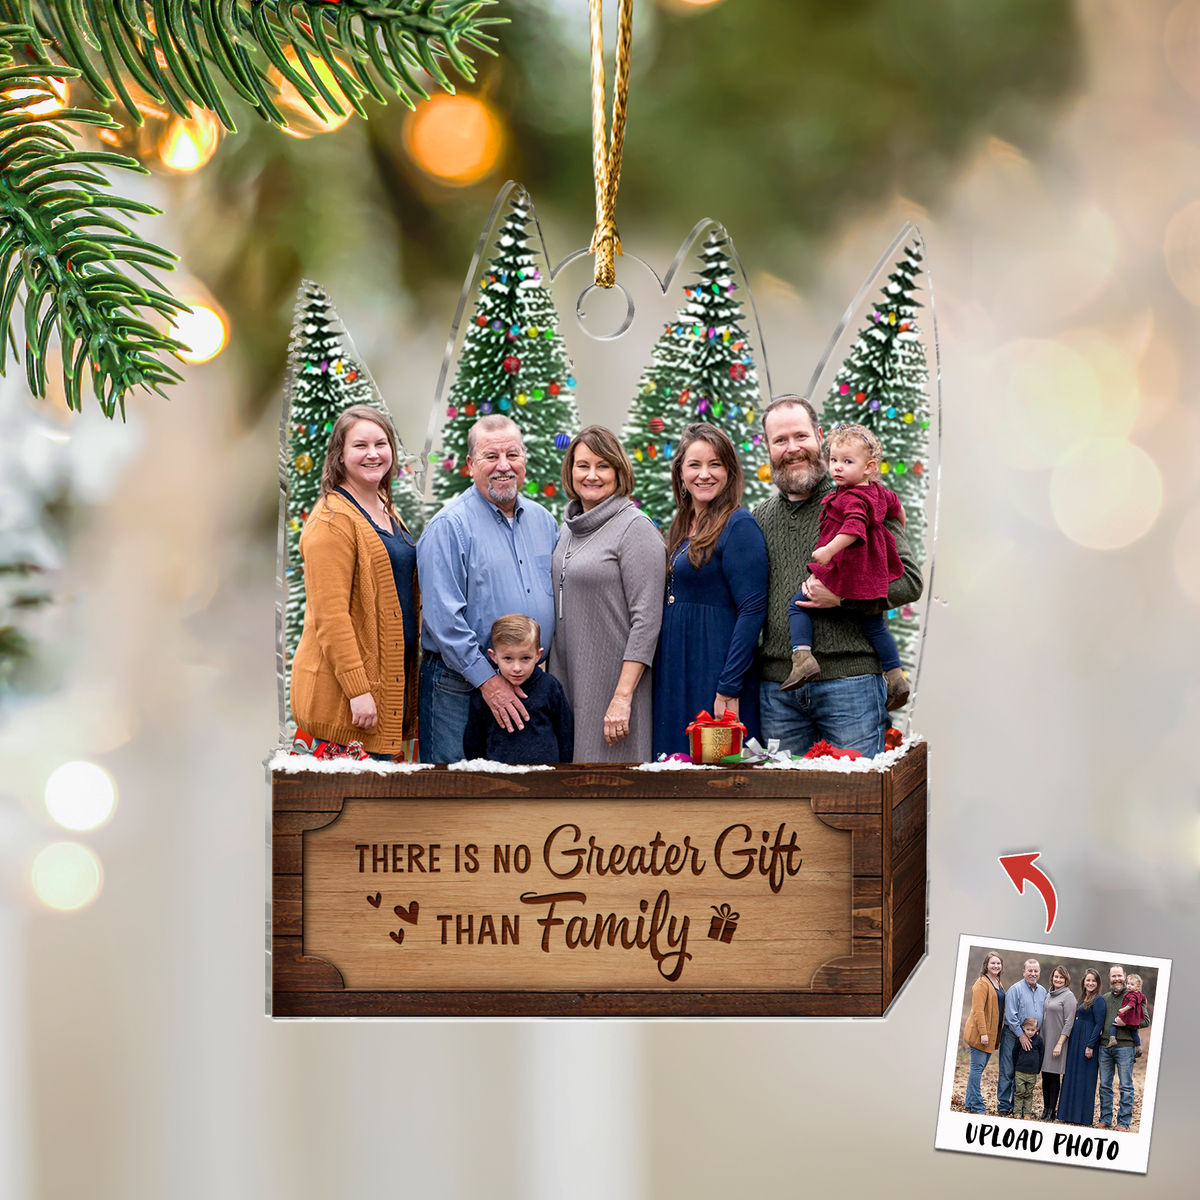 There is no Greater Gift than Family - Custom Ornament from Photo, Christmas Gifts for Family